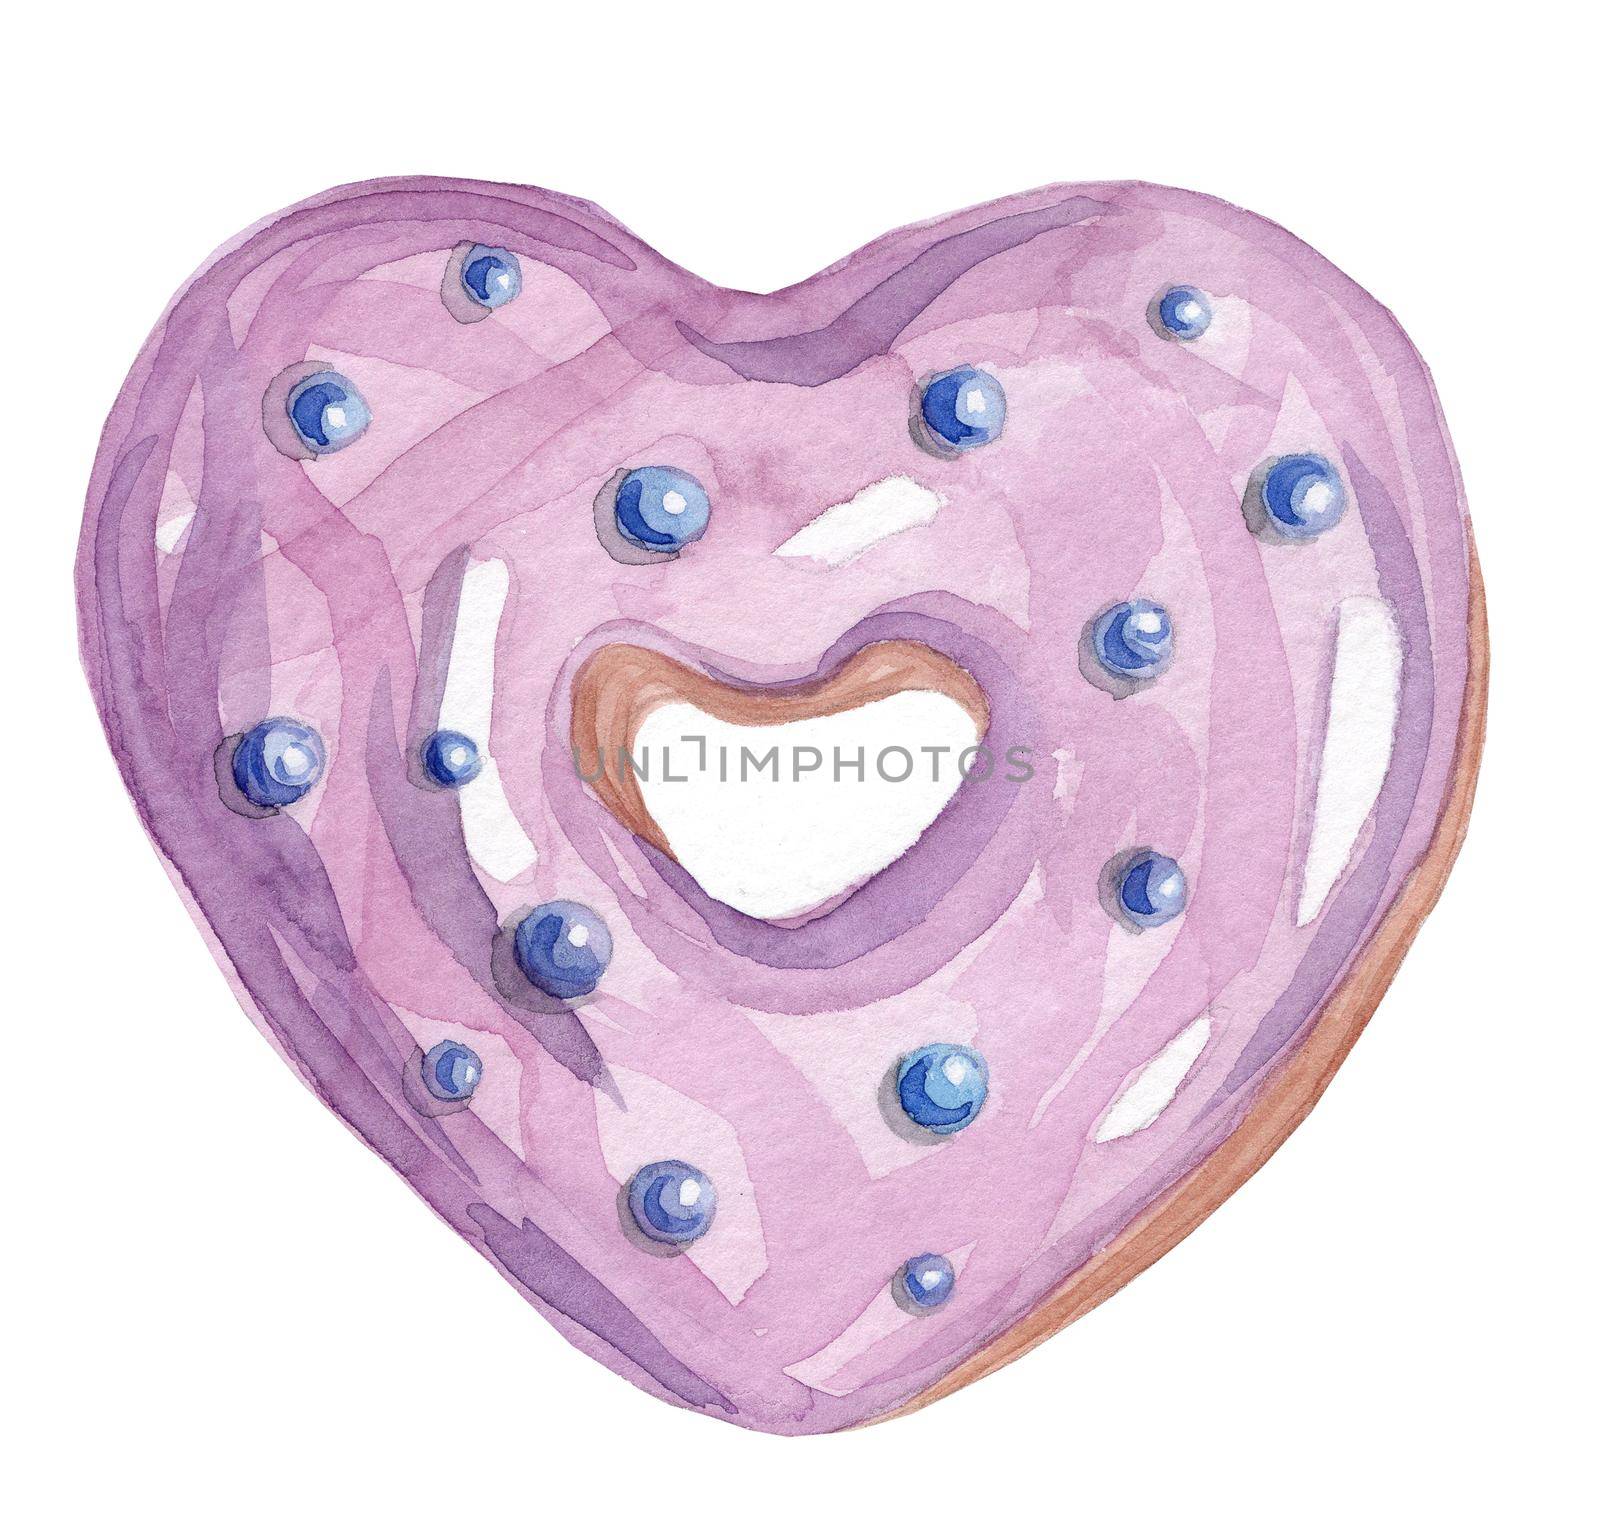 Watercolor hand drawn purple heart shaped donut with blue decoration isolated on white background by dreamloud